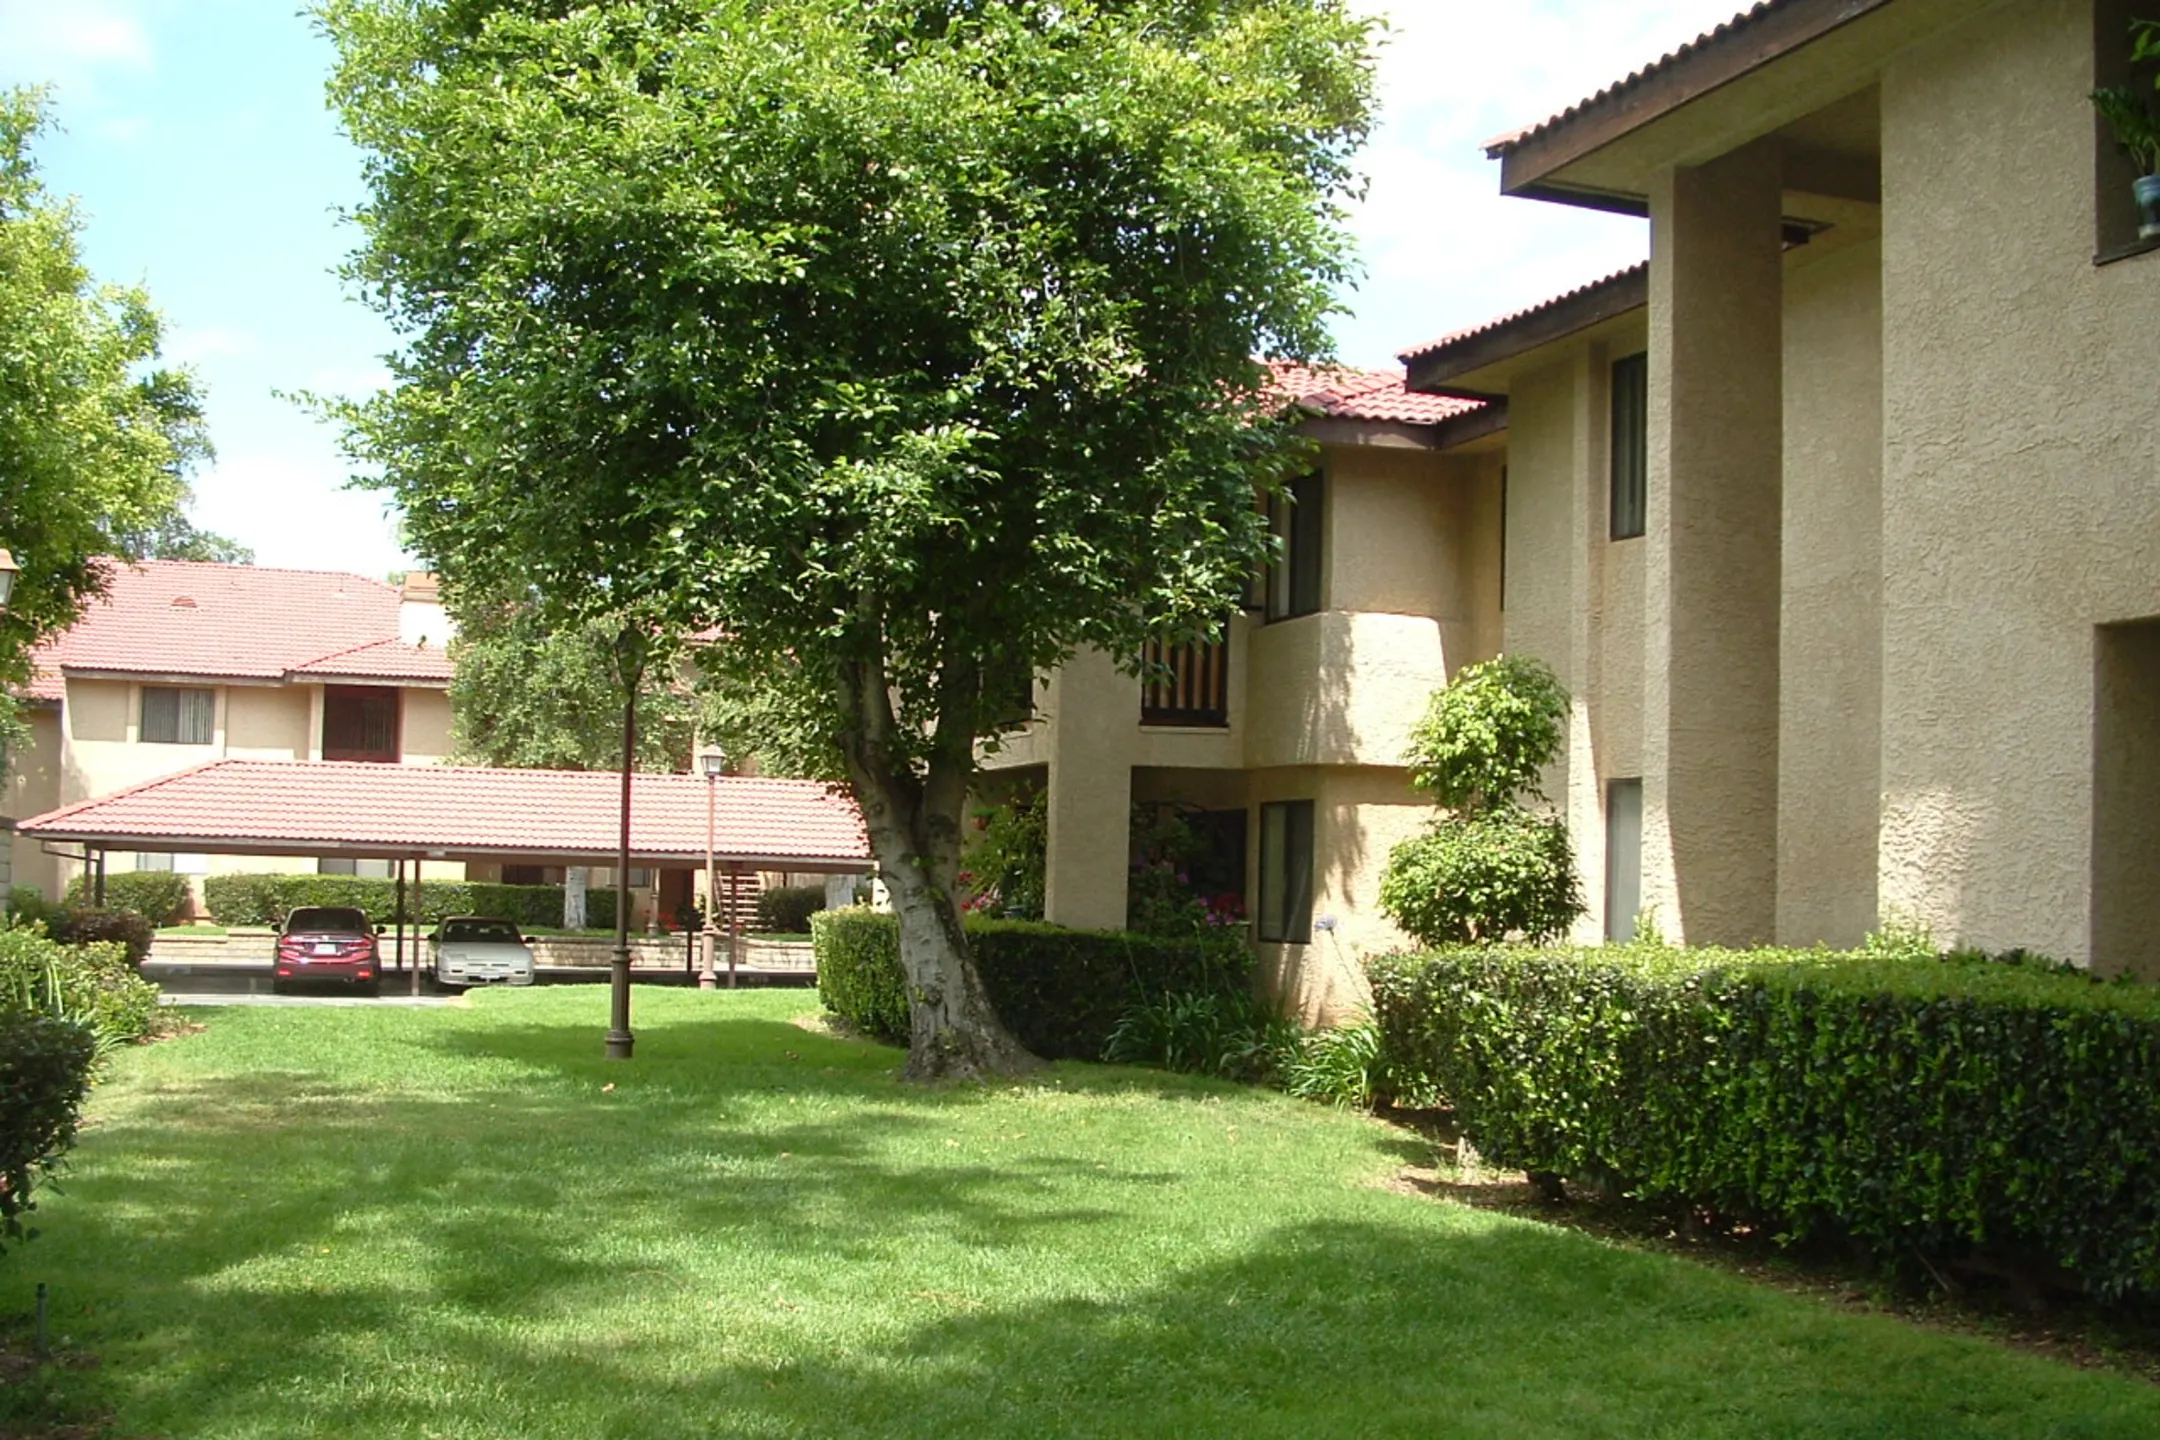 Building - Baywood Apartments - Simi Valley, CA